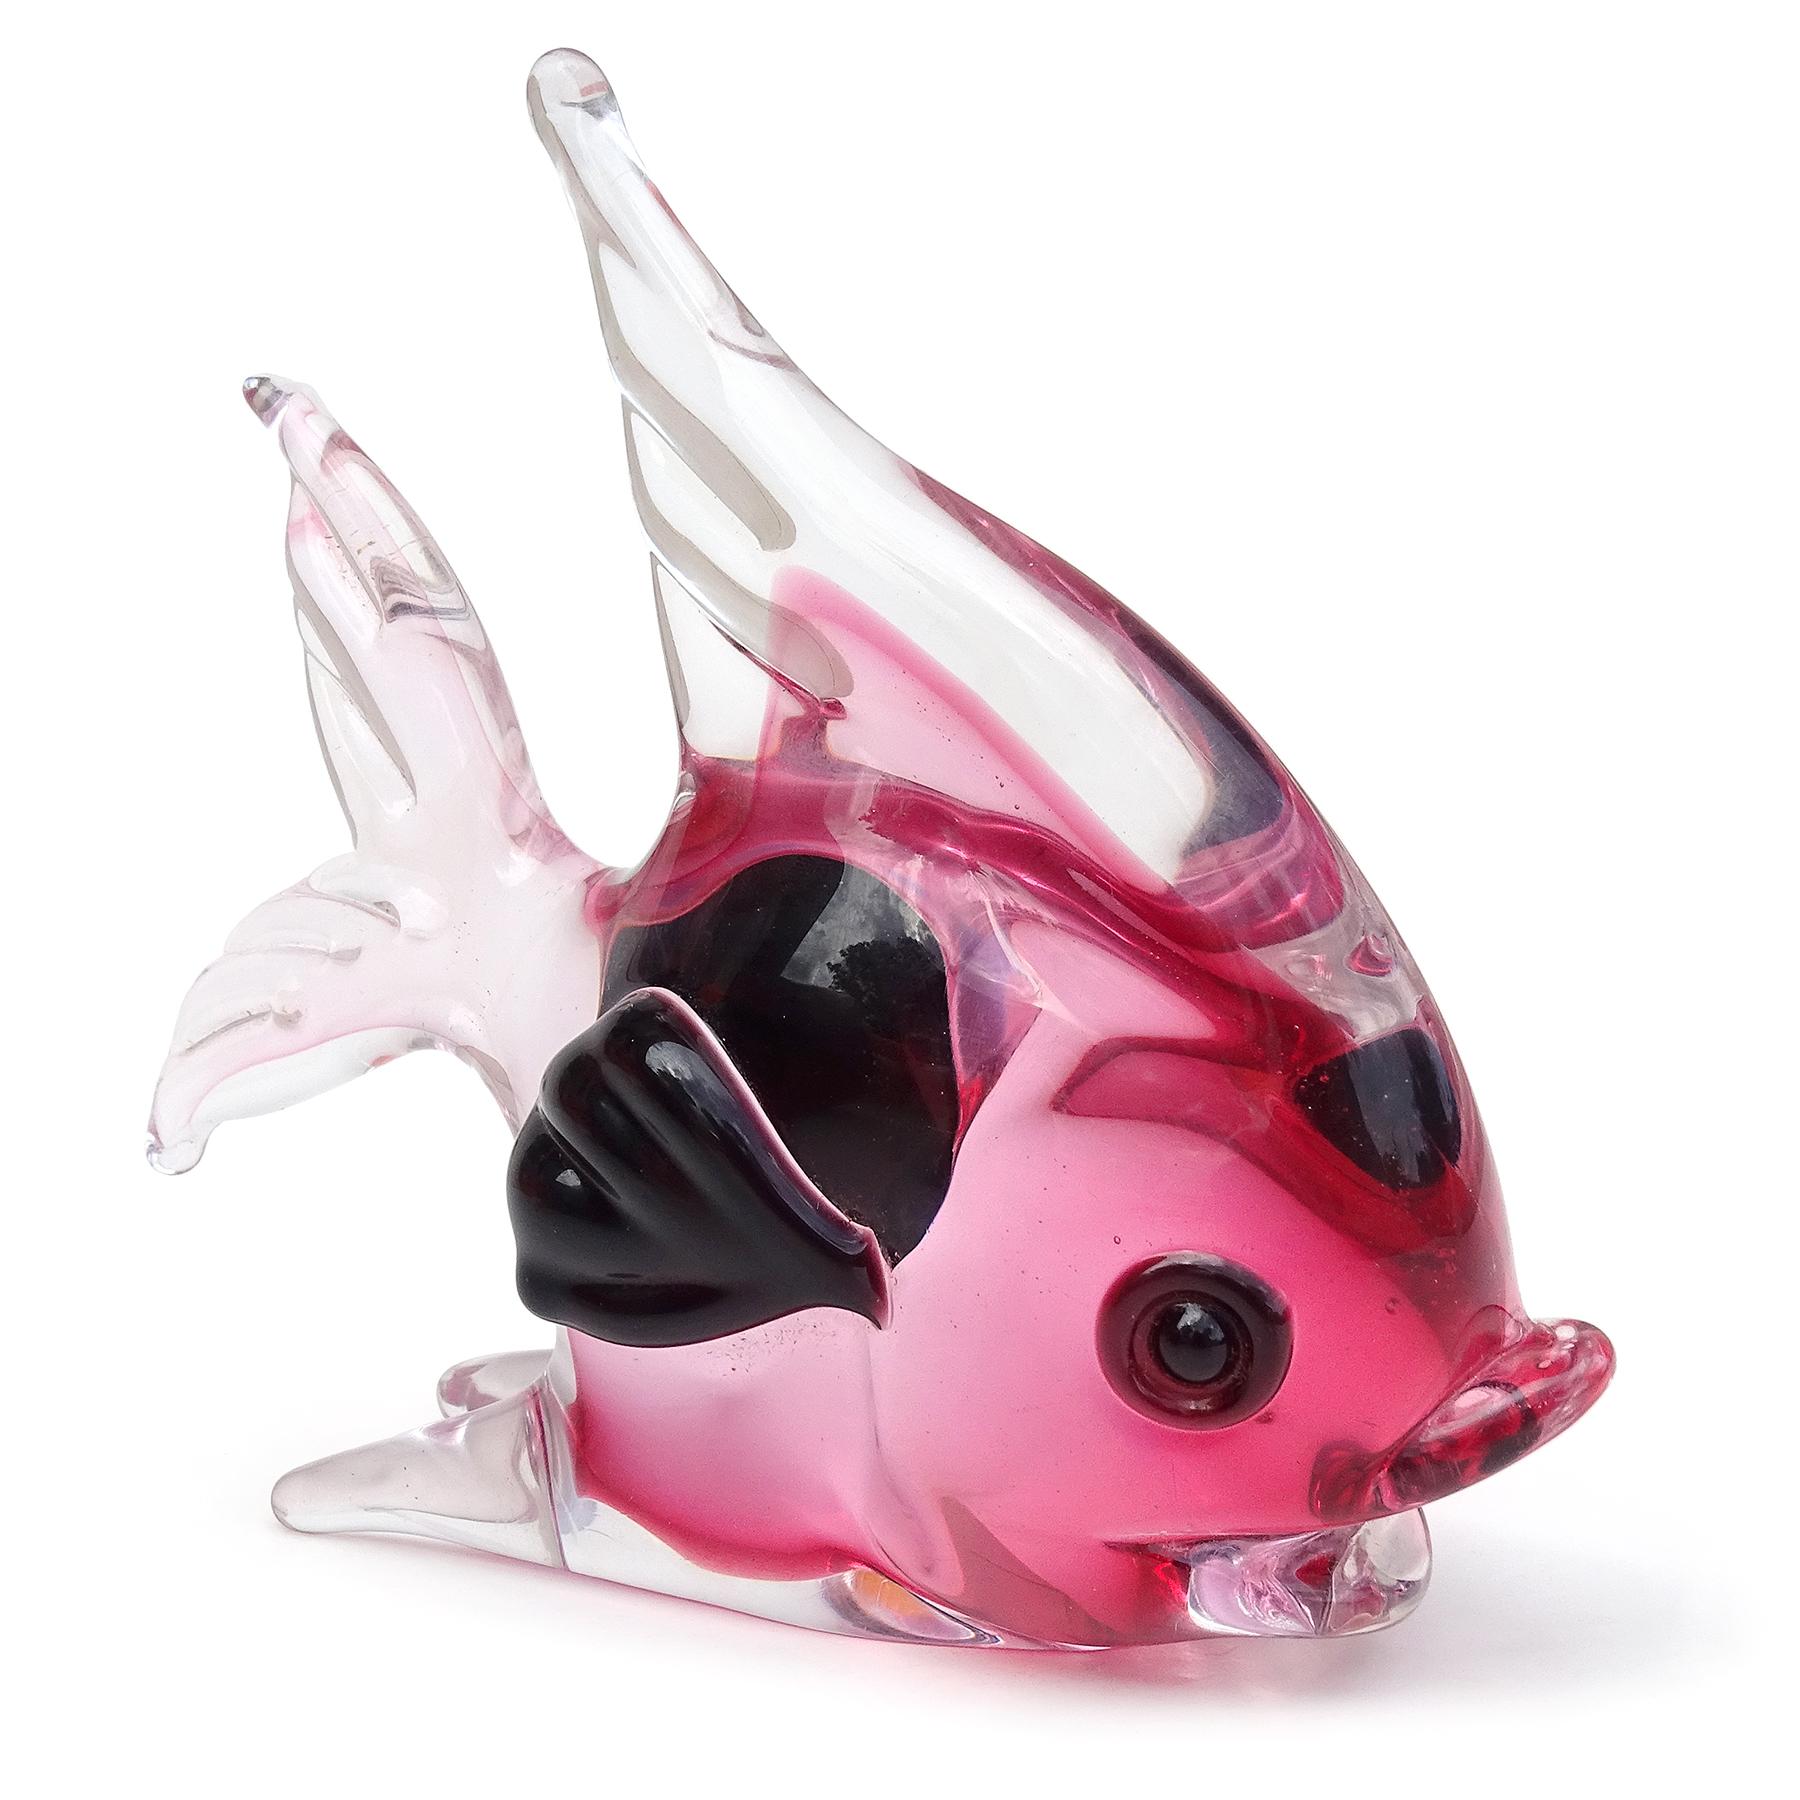 Beautiful vintage Murano hand blown Sommerso pink Italian art glass fish sculpture / figurine. Documented to designer Archimede Seguso. It still retains the large original 